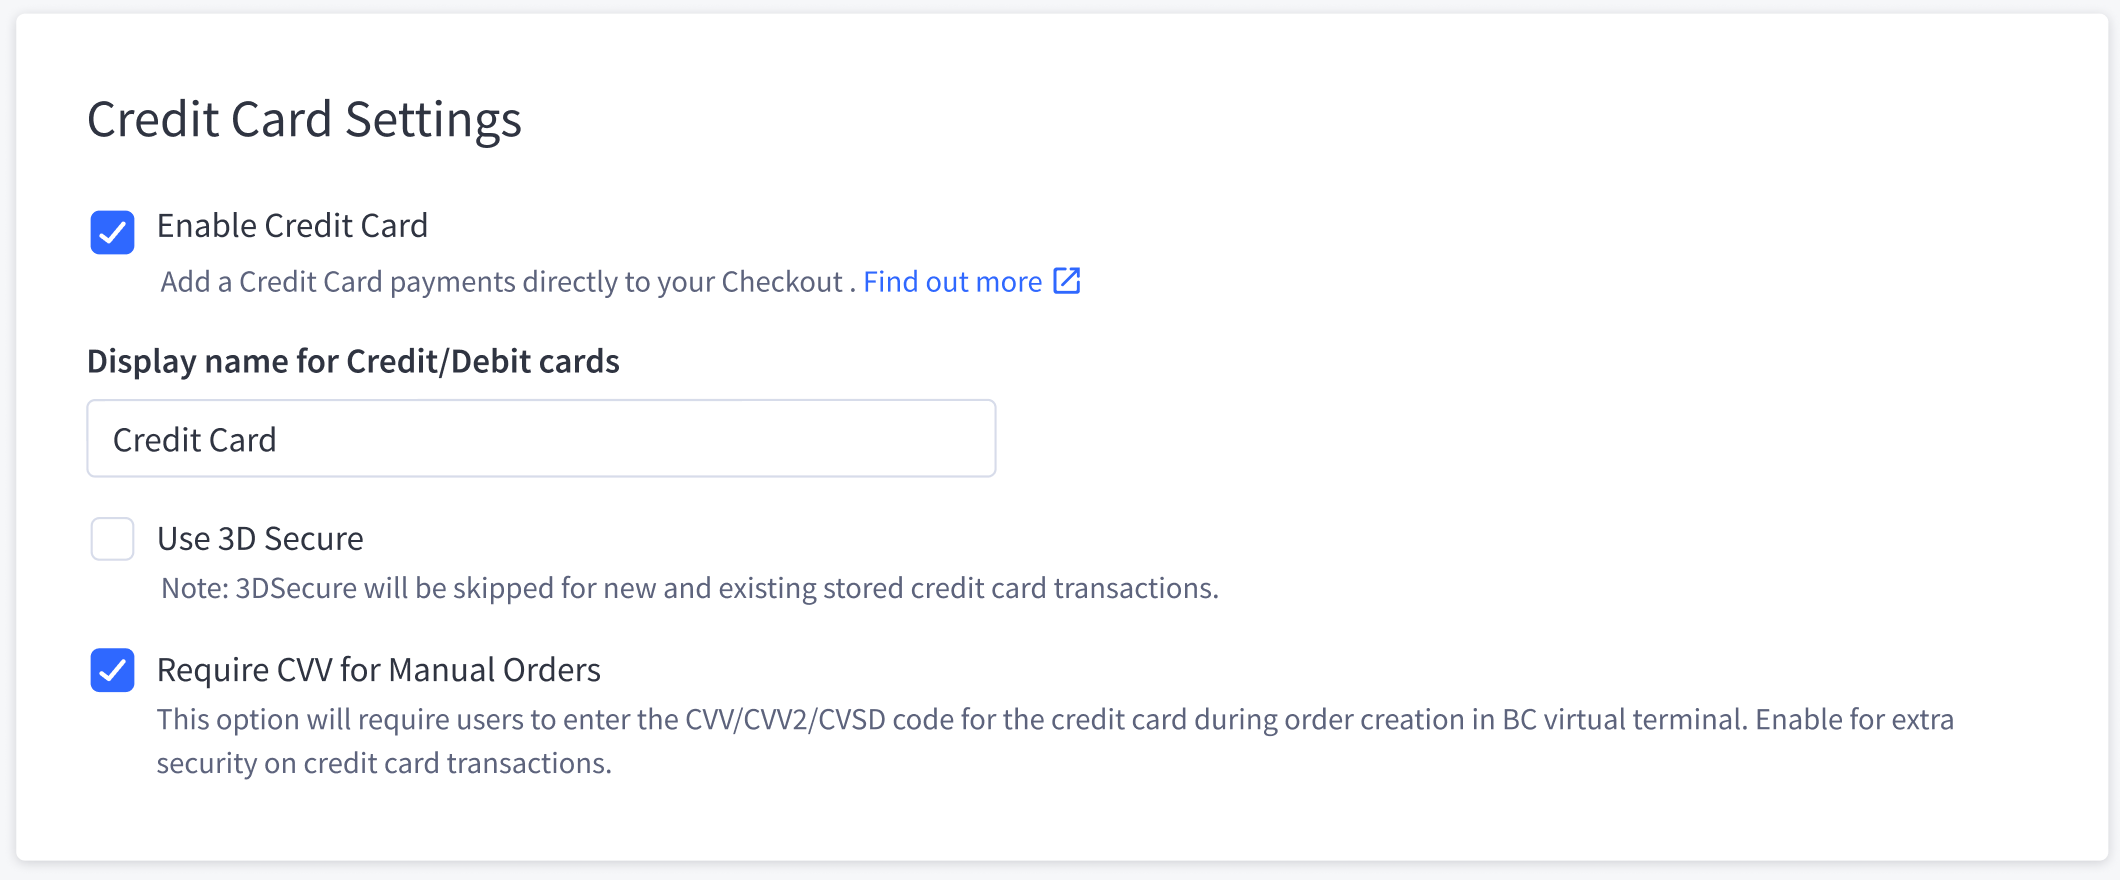 Credit card fields for customizing the display name, and enabling 3D Secure and CVV requirement for manual orders.